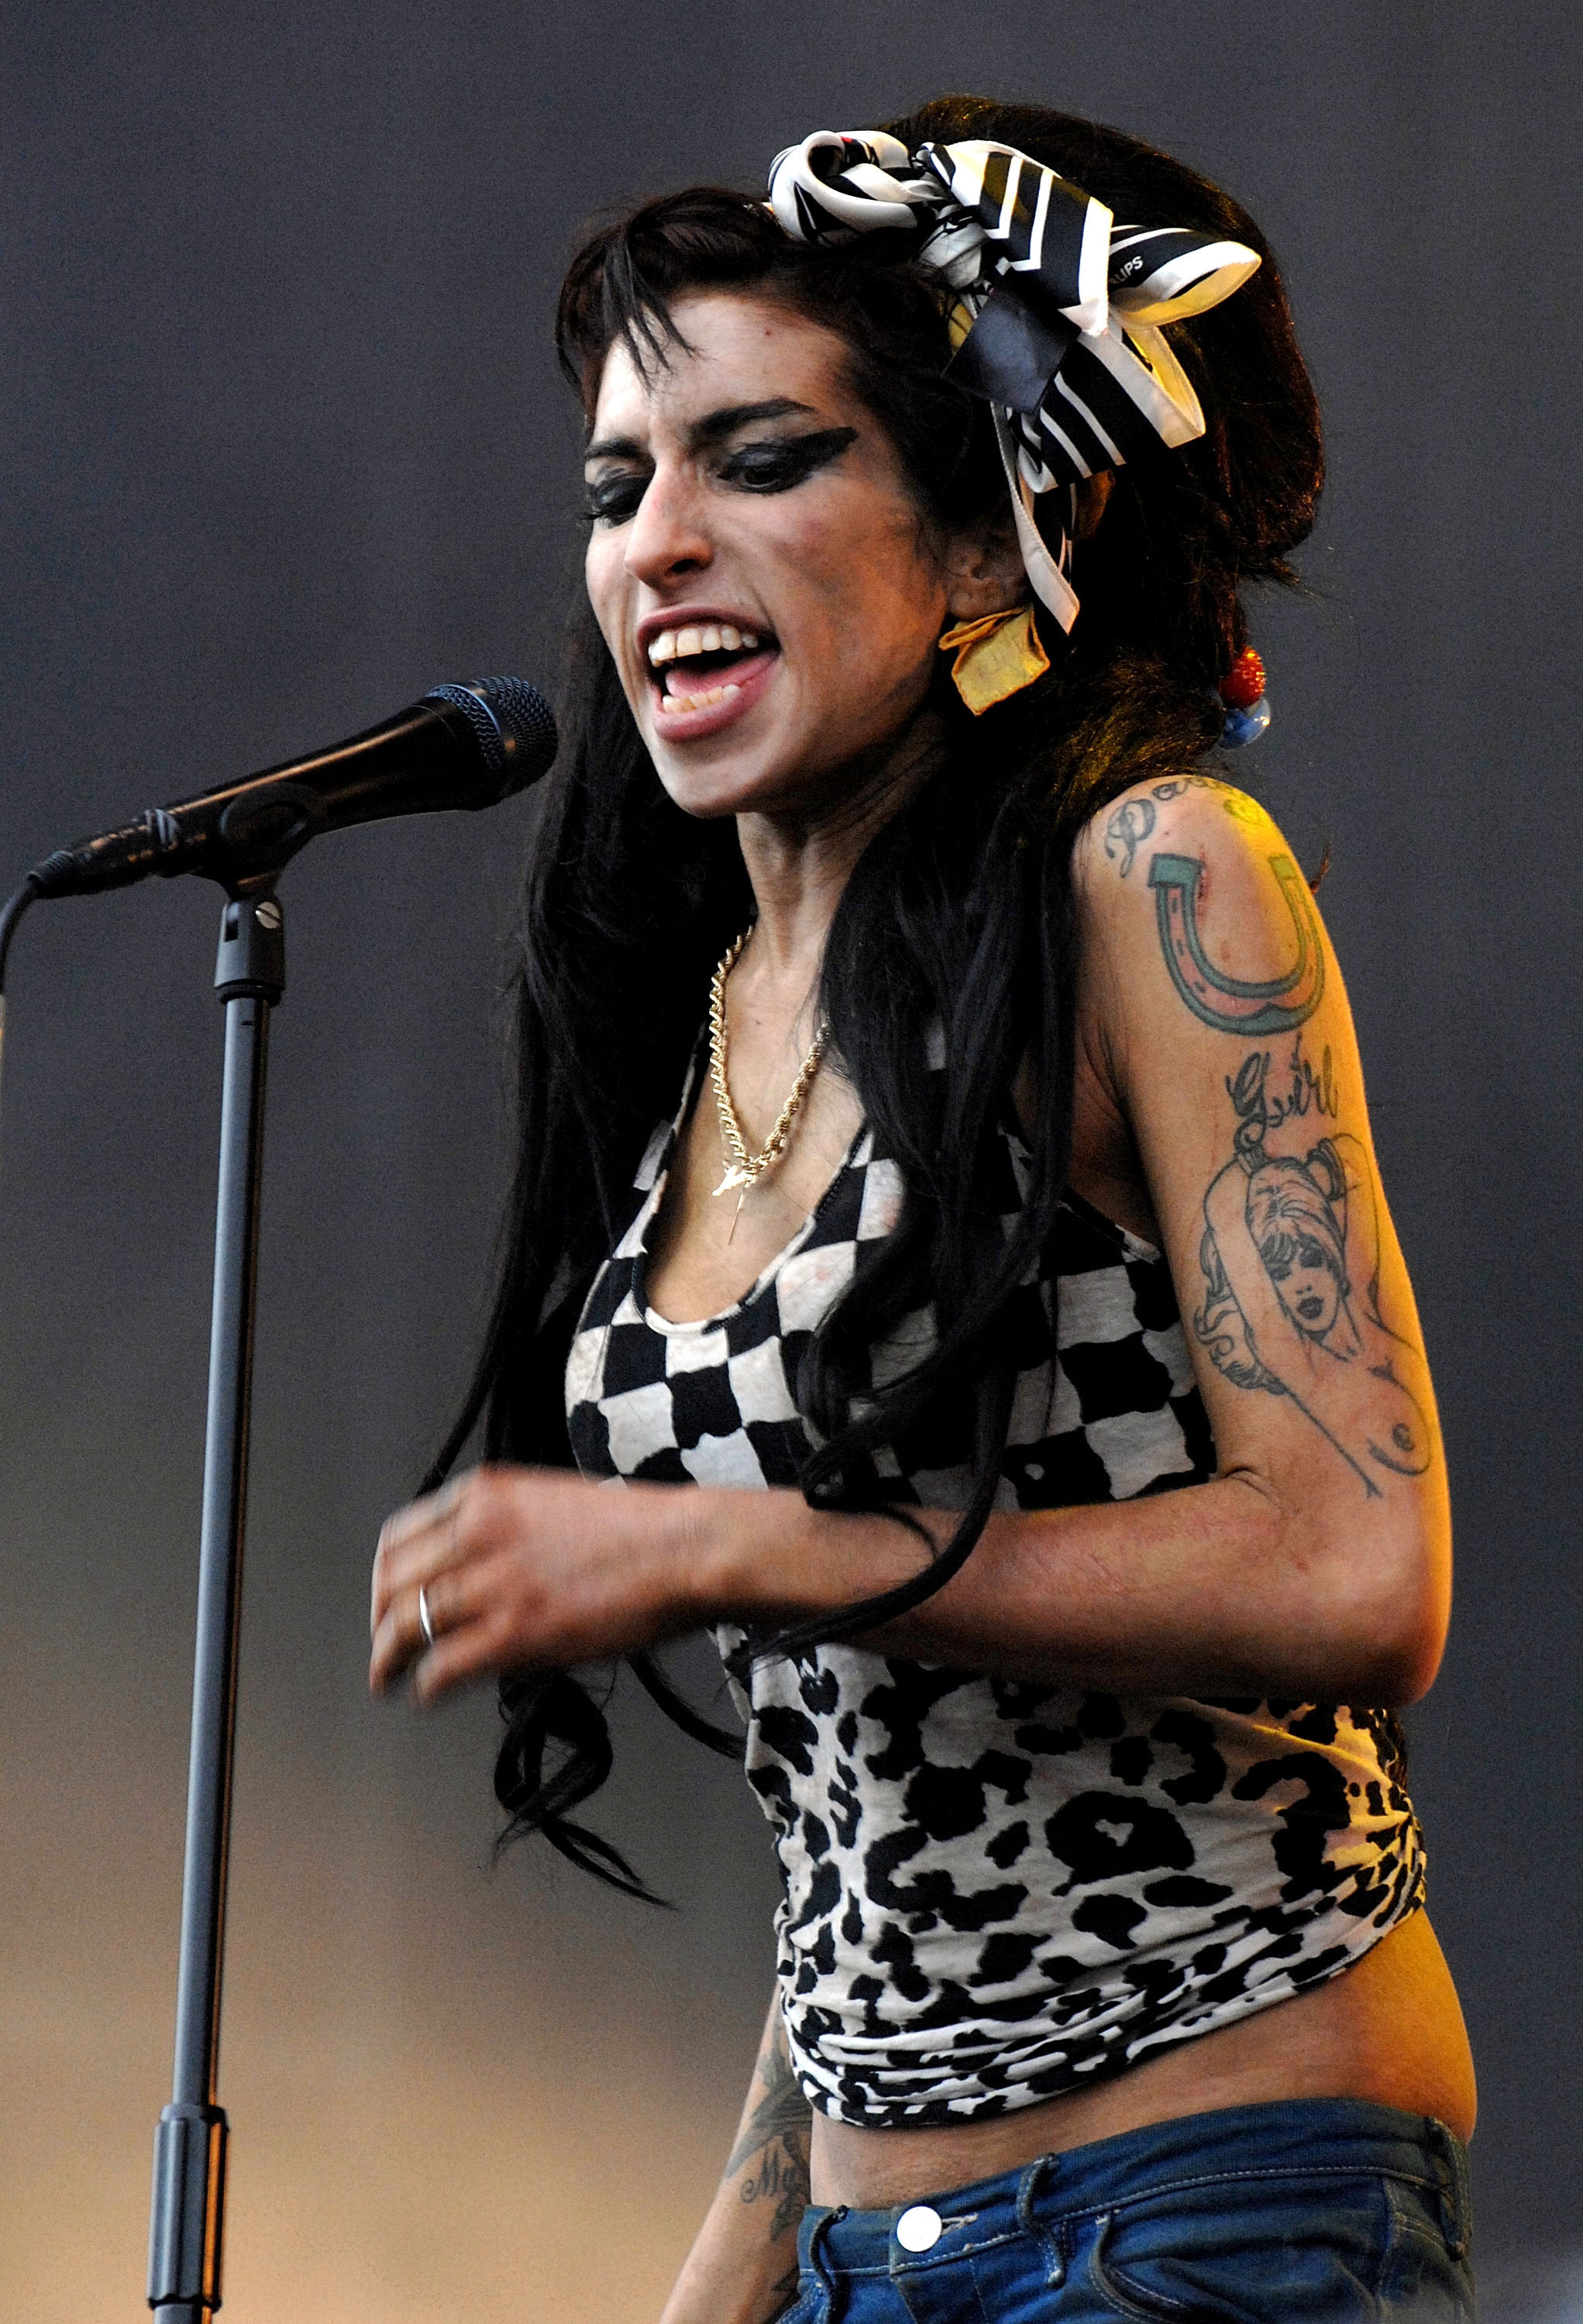 Amy Winehouse’s on-off relationship with her ex-husband Blake Fielder-Civil will be a focal point of her forthcoming biopic